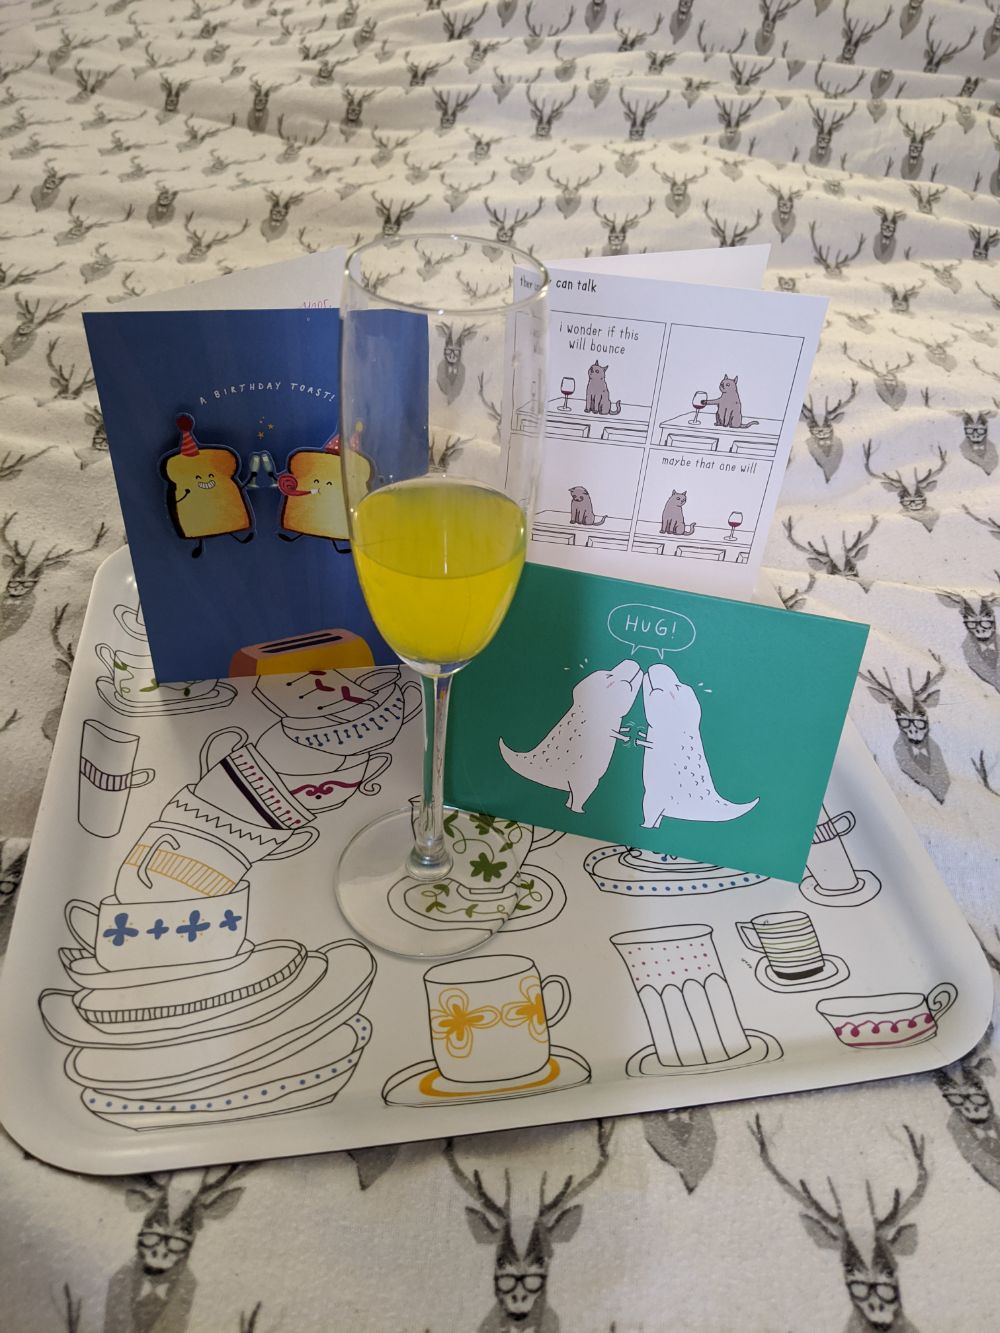 Three birthday cards on a tray, circling a champagne flute that looks like it is full of bucks fizz but is actually Tango